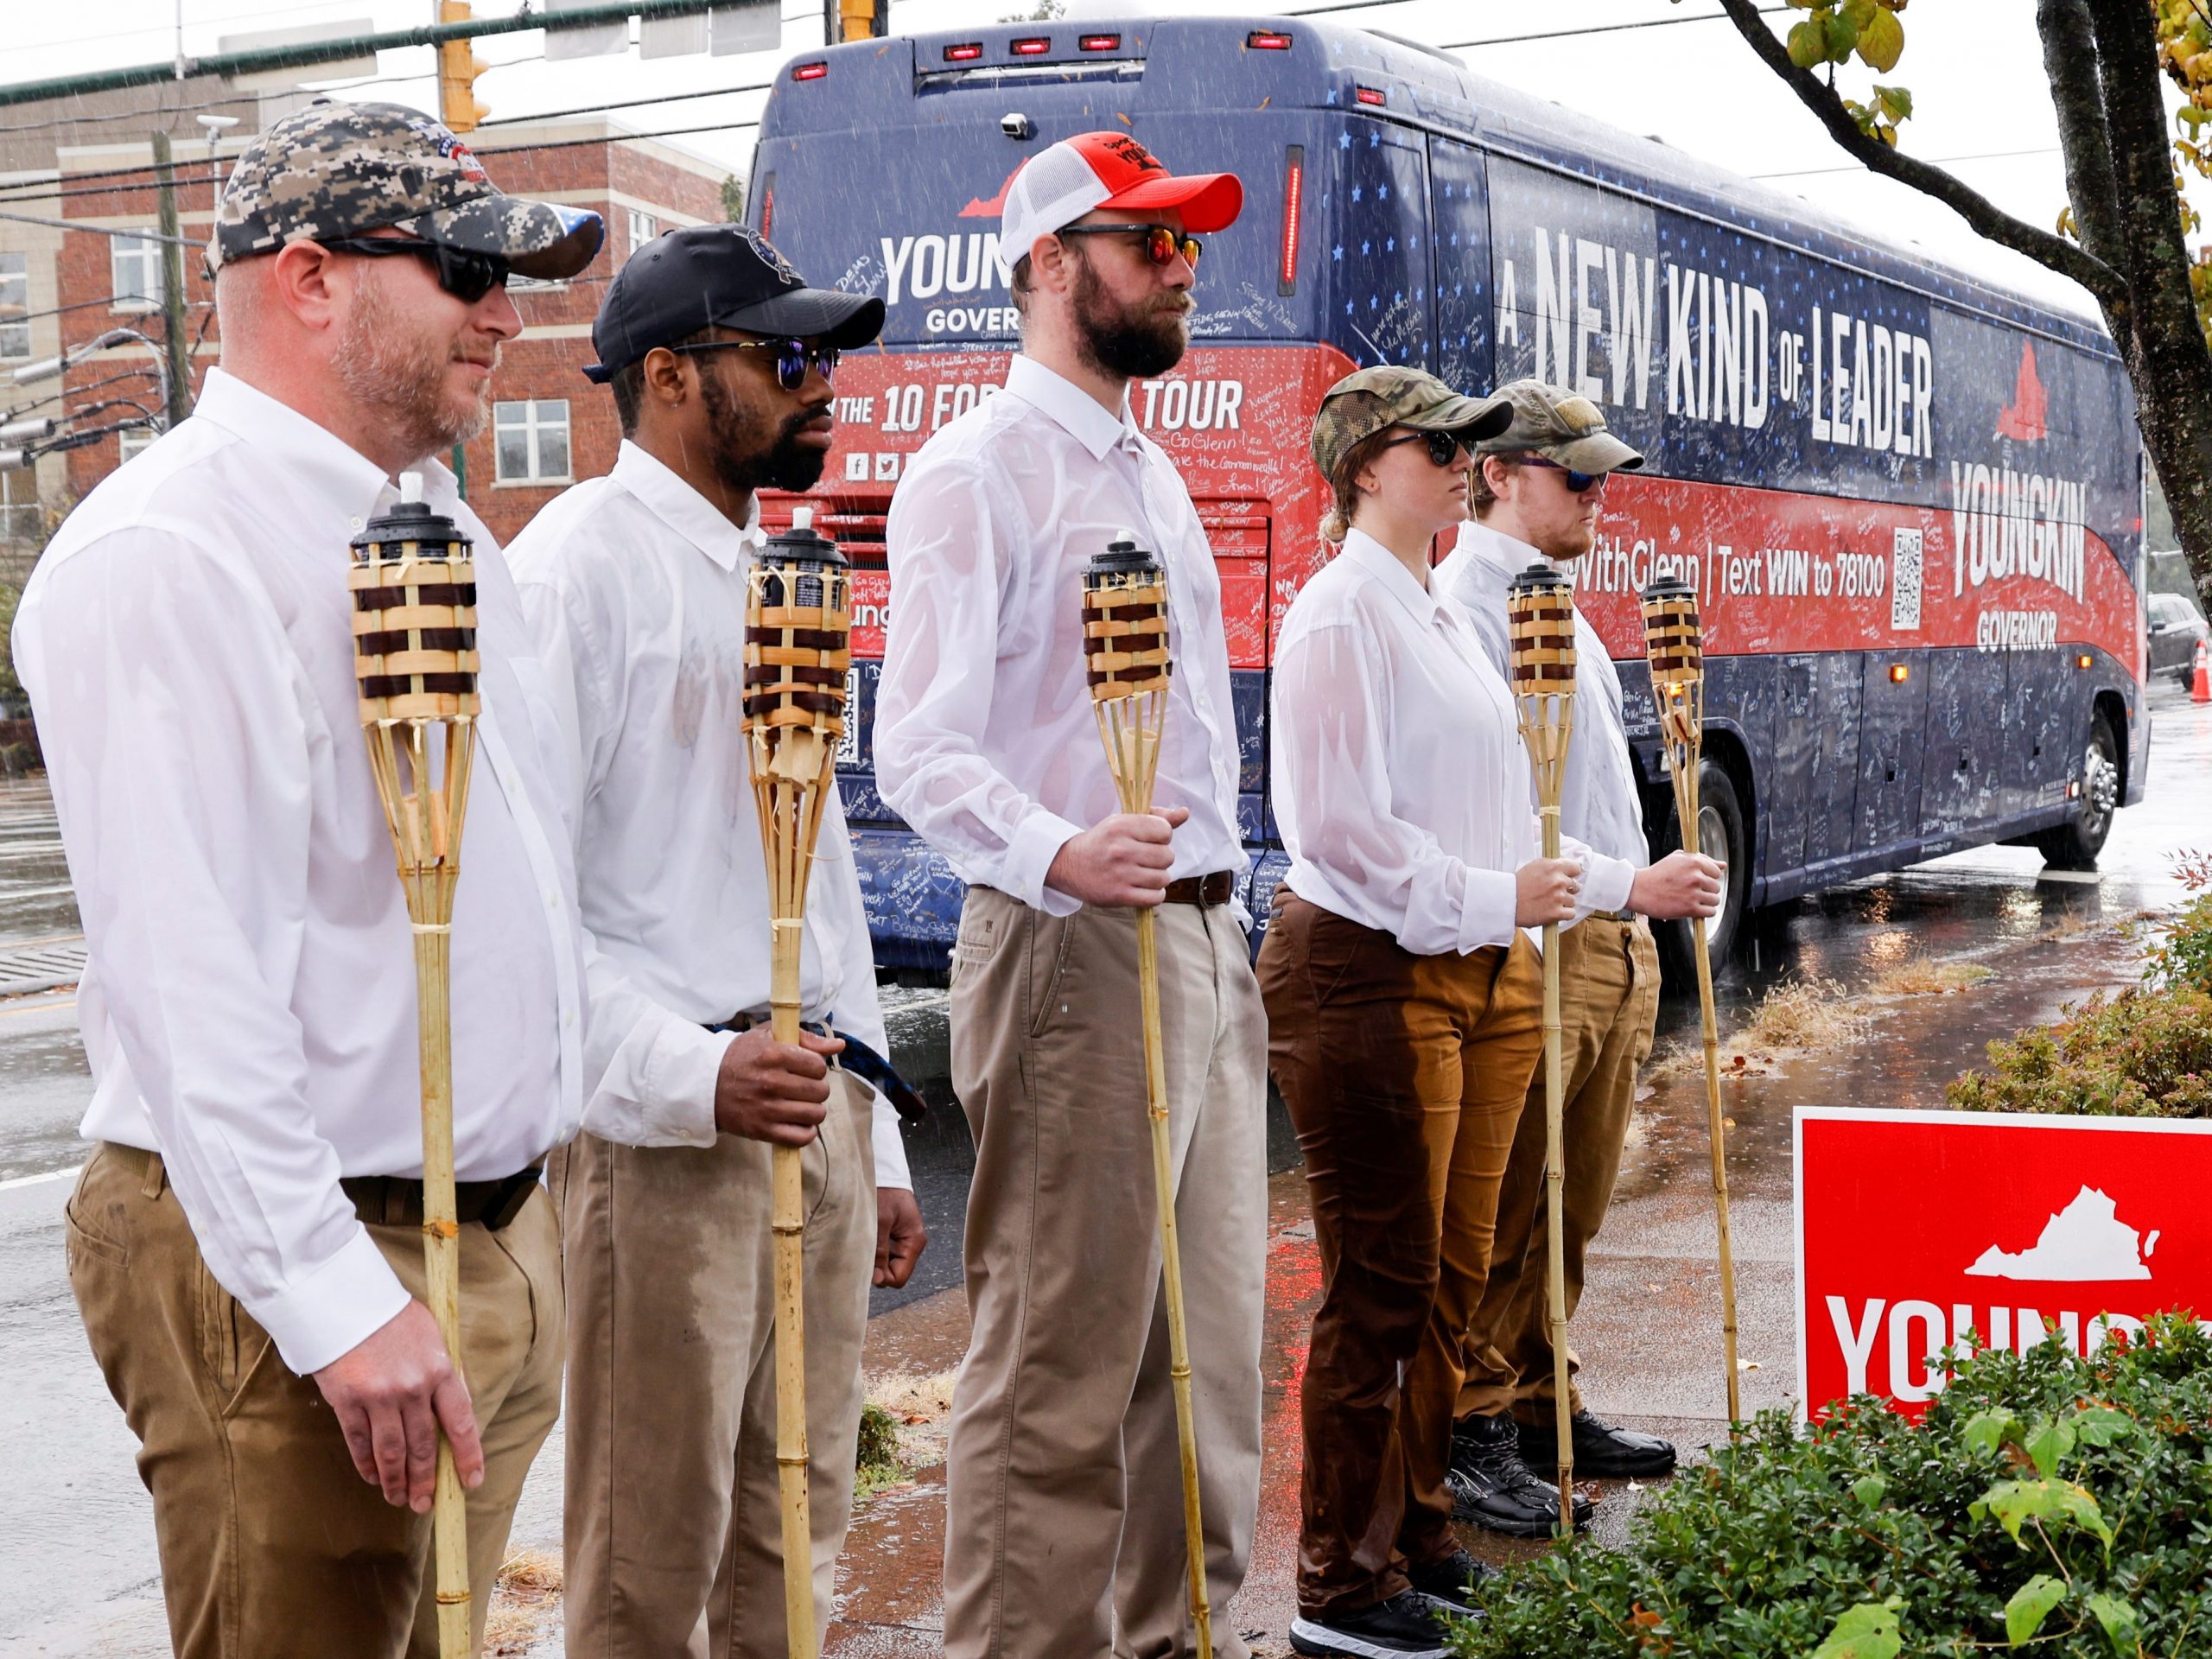 A small group of demonstrators dressed as "Unite the Right" rally-goers with tiki torches stand on a sidewalk as Republican candidate for governor of Virginia Glenn Youngkin arrives on his bus for a campaign event at a Mexican restaurant in Charlottesville, Virginia, U.S. October 29, 2021.